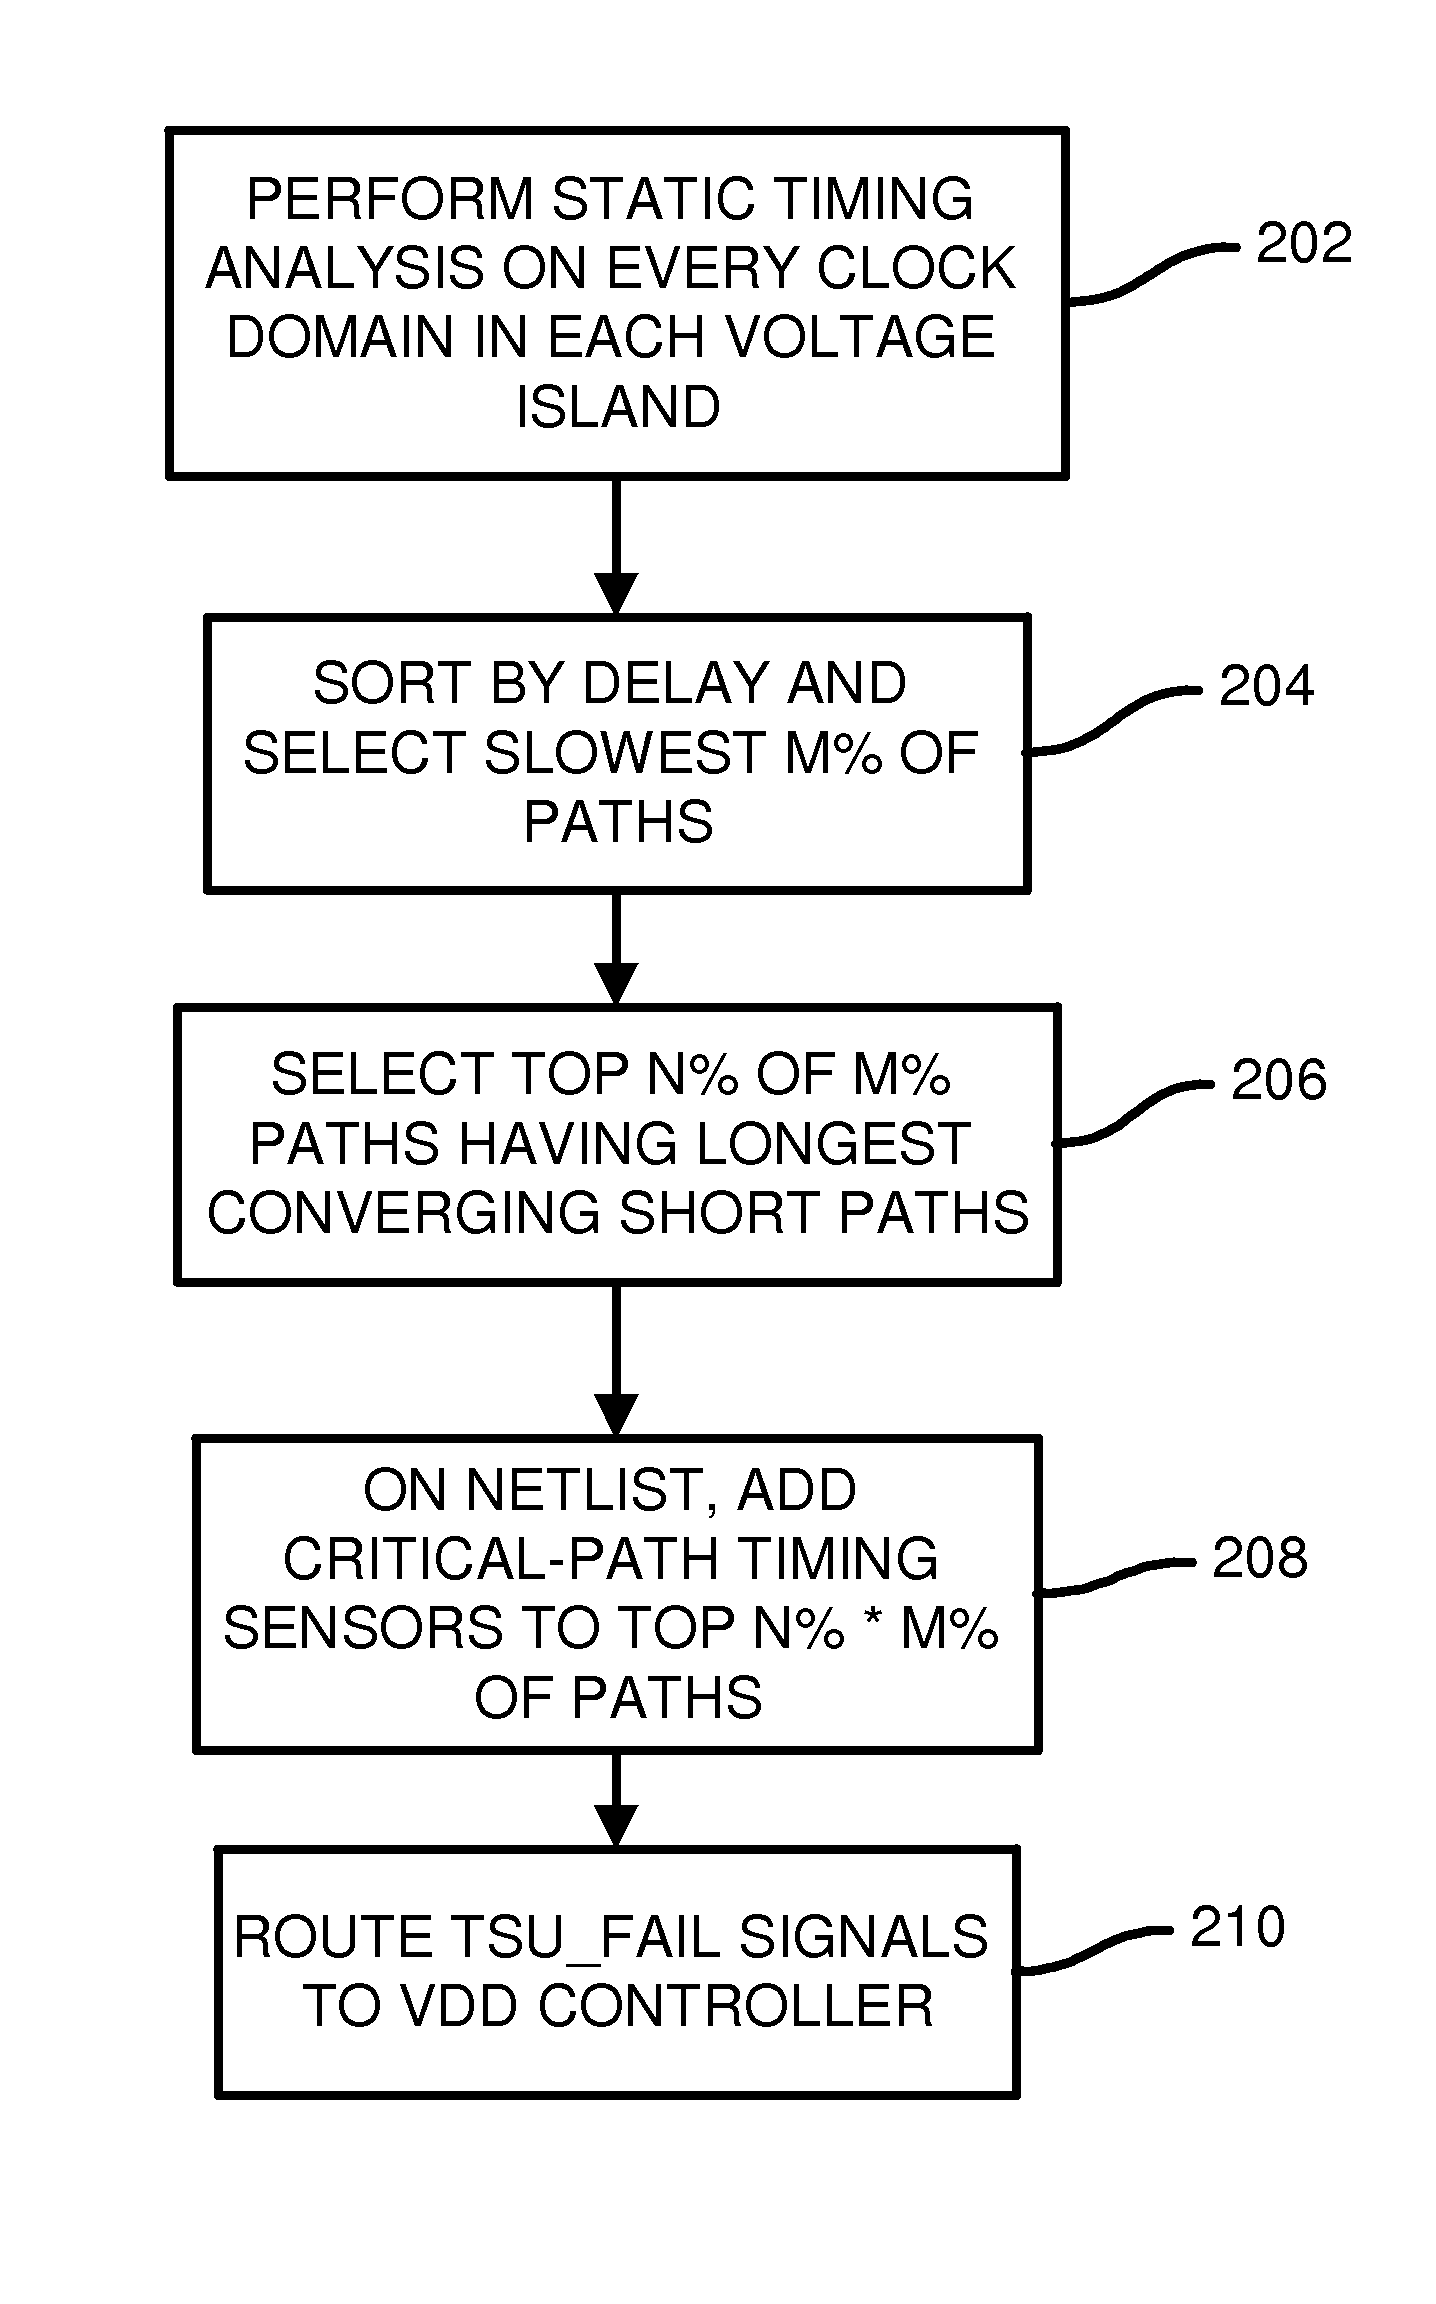 Method and algorithm for functional critical paths selection and critical path sensors and controller insertion